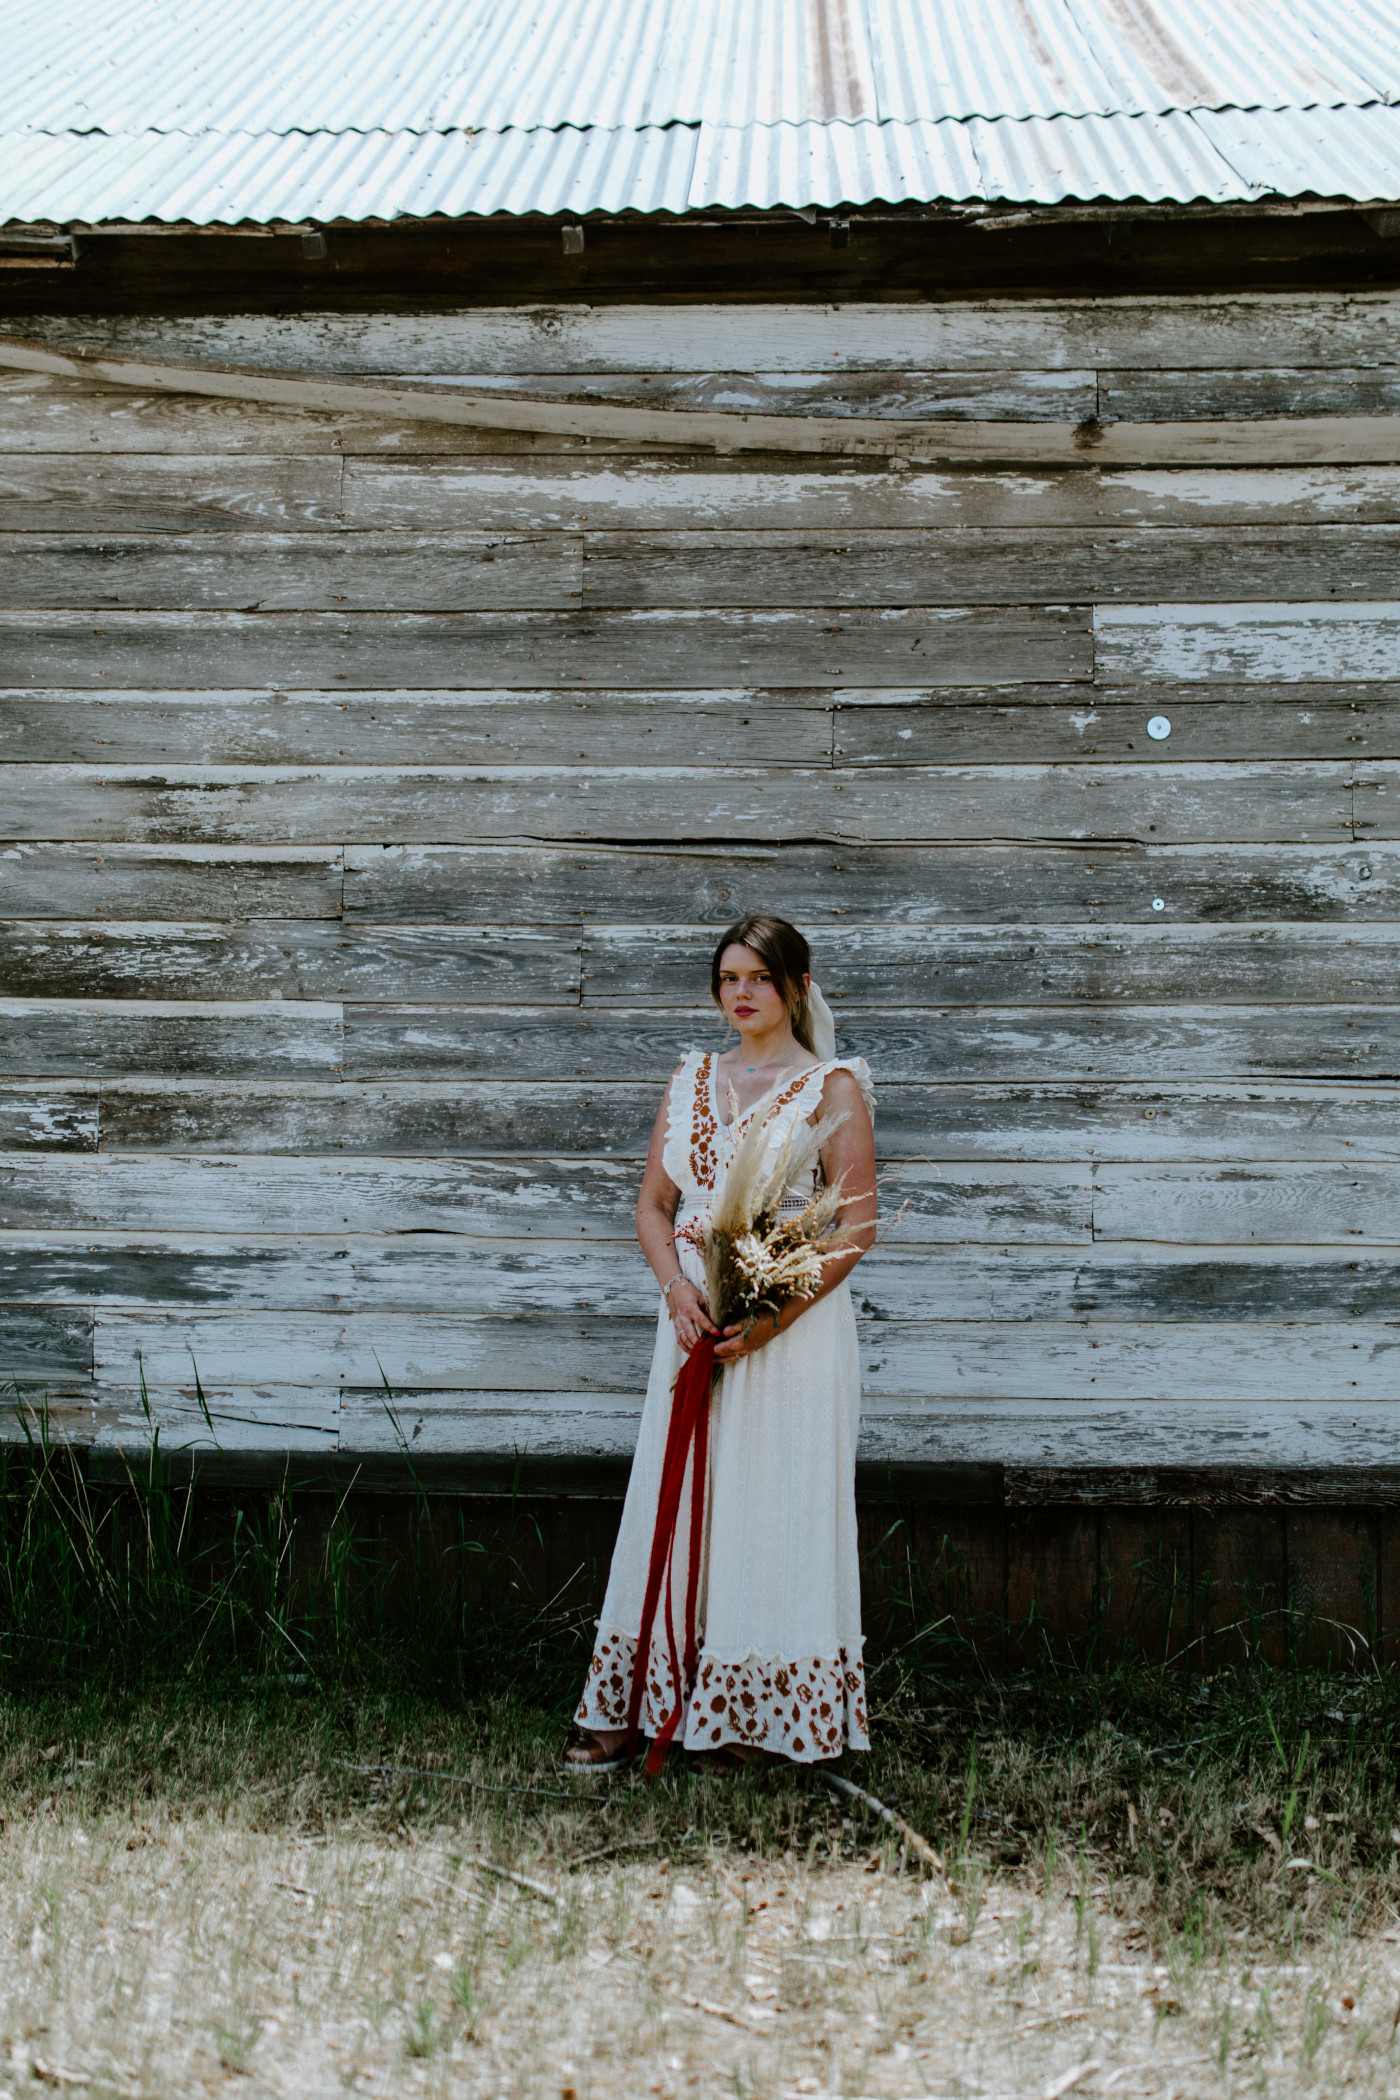 Emily stands with her flowers. Elopement photography in the Central Oregon desert by Sienna Plus Josh.